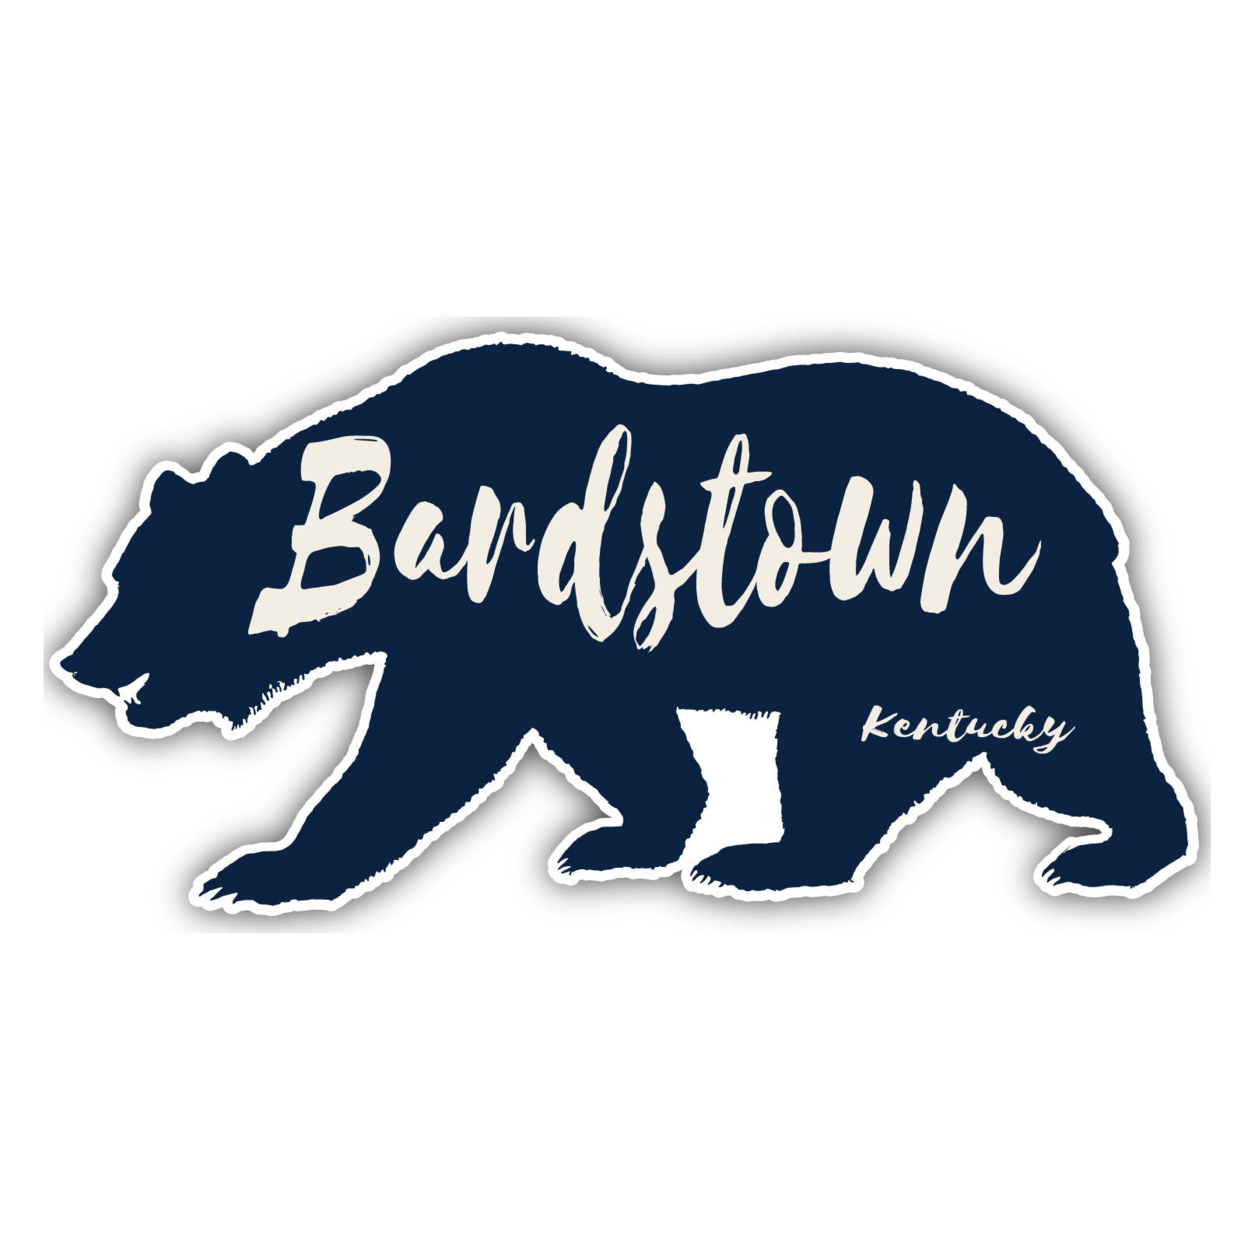 Bardstown Kentucky Souvenir Decorative Stickers (Choose Theme And Size) - Single Unit, 12-Inch, Great Outdoors